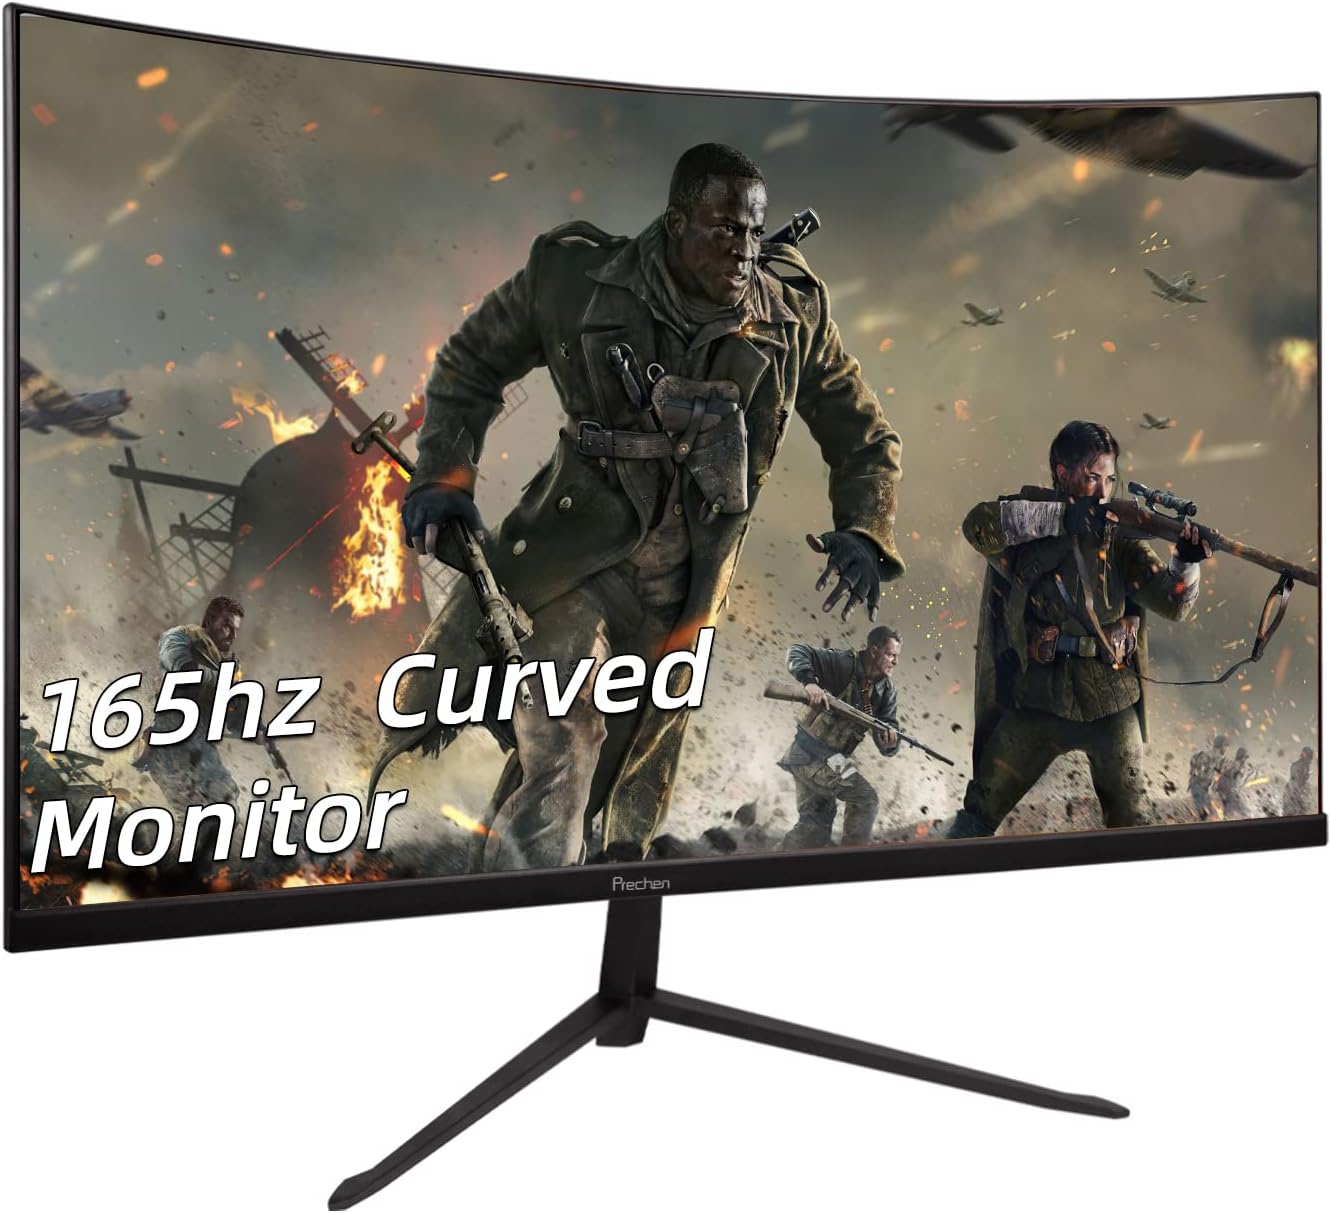 63d2382576e7685ced69258d 24 inch 165hz 144hz gaming monitor